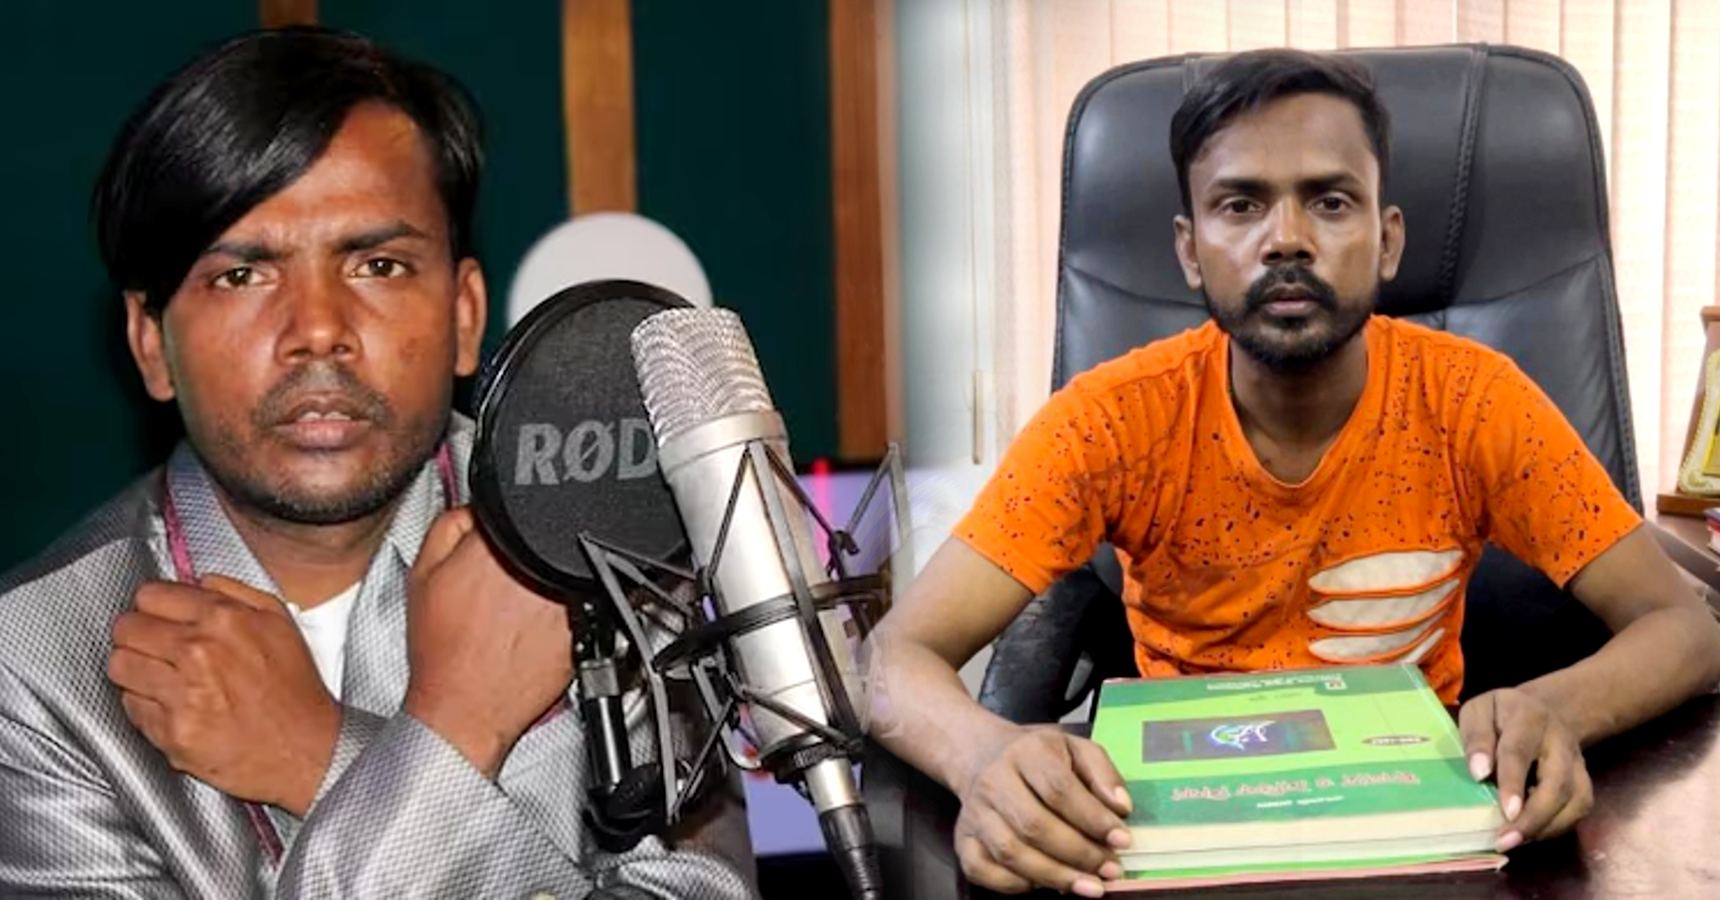 Hero Alom started reading books after getting trolled on social media